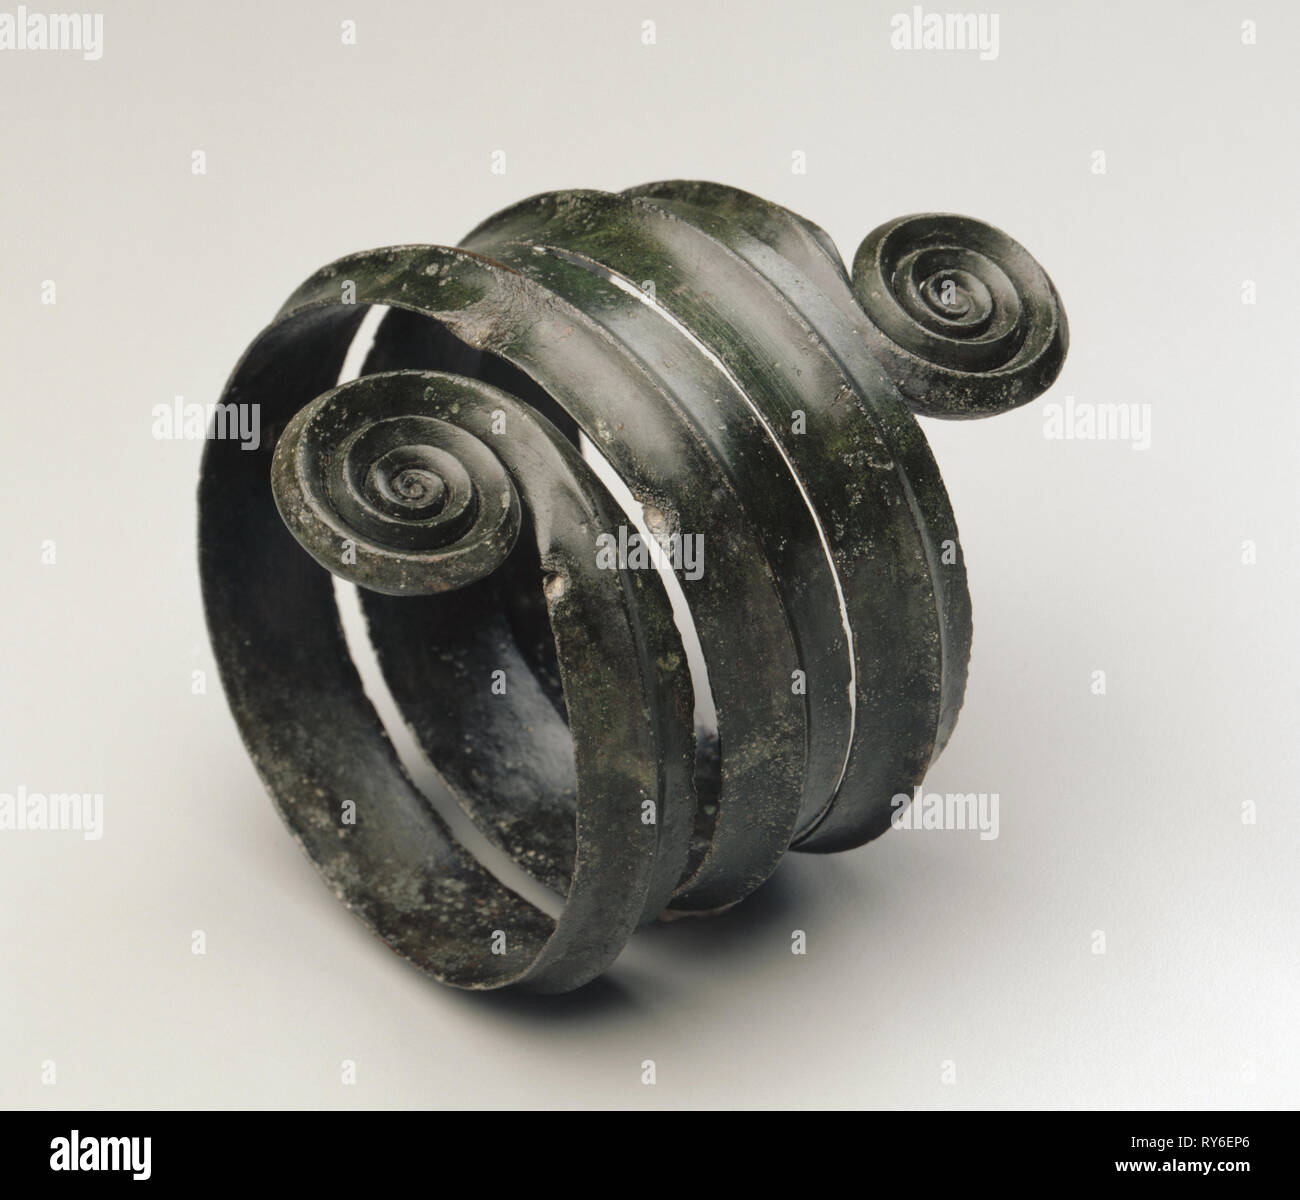 Turned Armilla, c. 1500 BC. Hungary, Bronze Age, c. 2500-800 BC. Bronze, wrought; overall: 12.5 x 10.4 cm (4 15/16 x 4 1/8 in Stock Photo